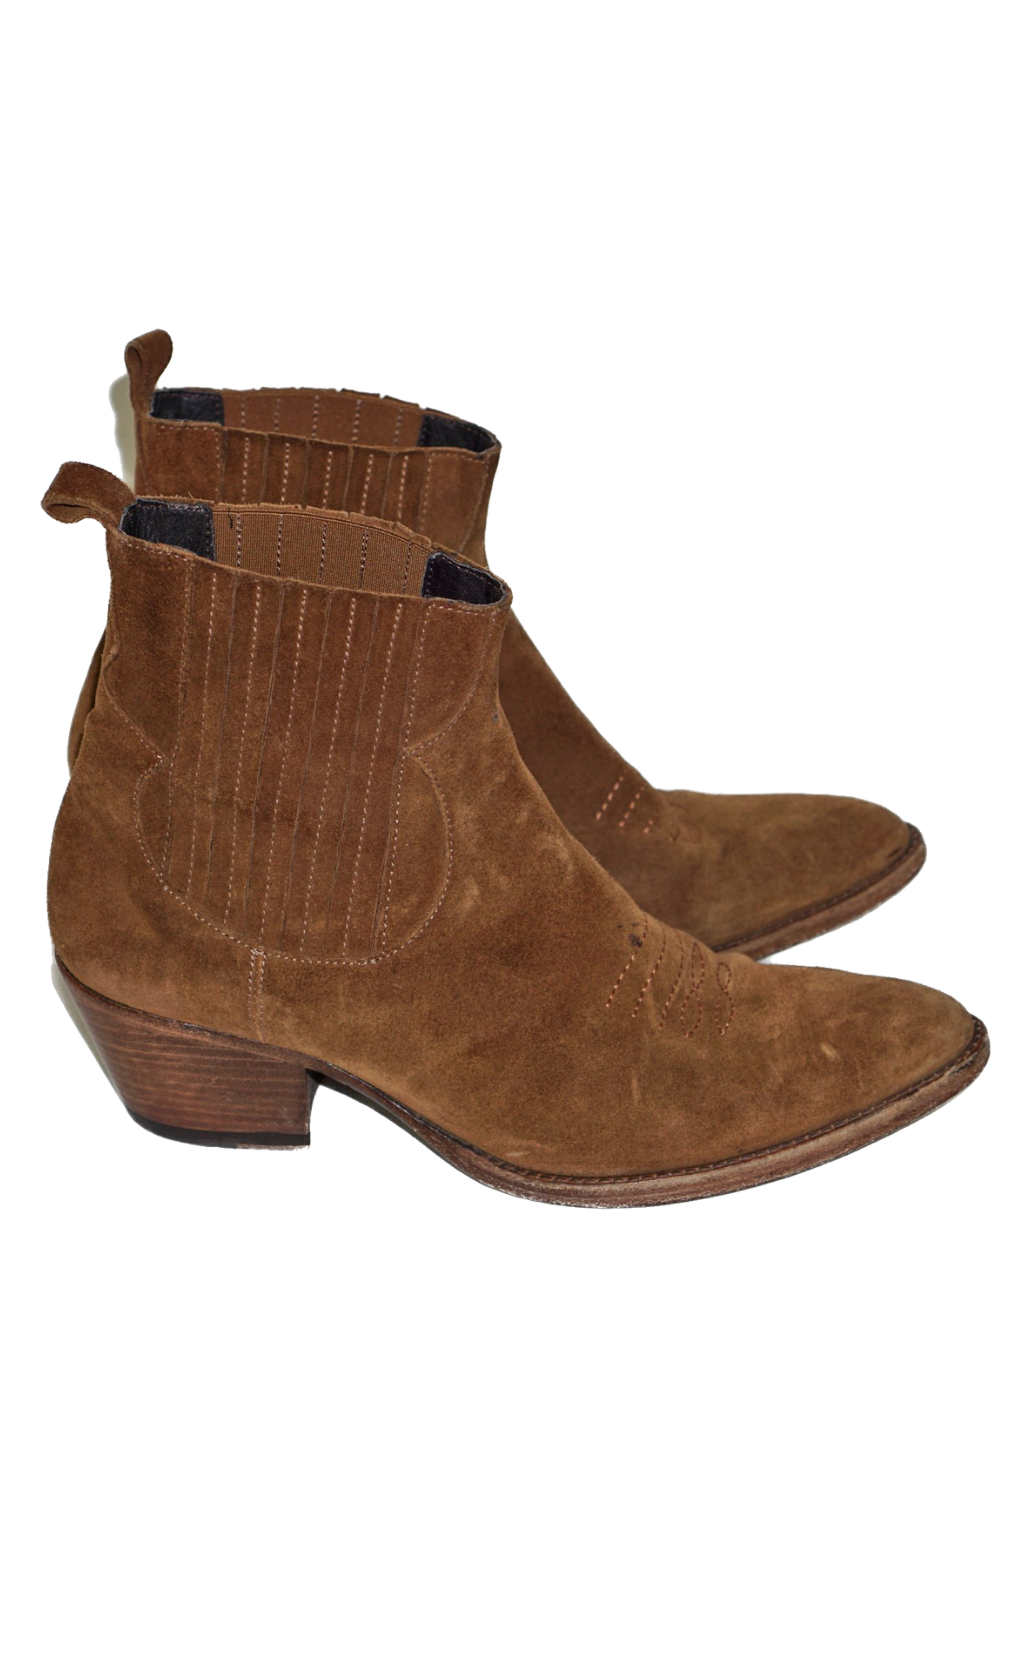 MAJE Suede Western Cowboy Ankle Boots resellum